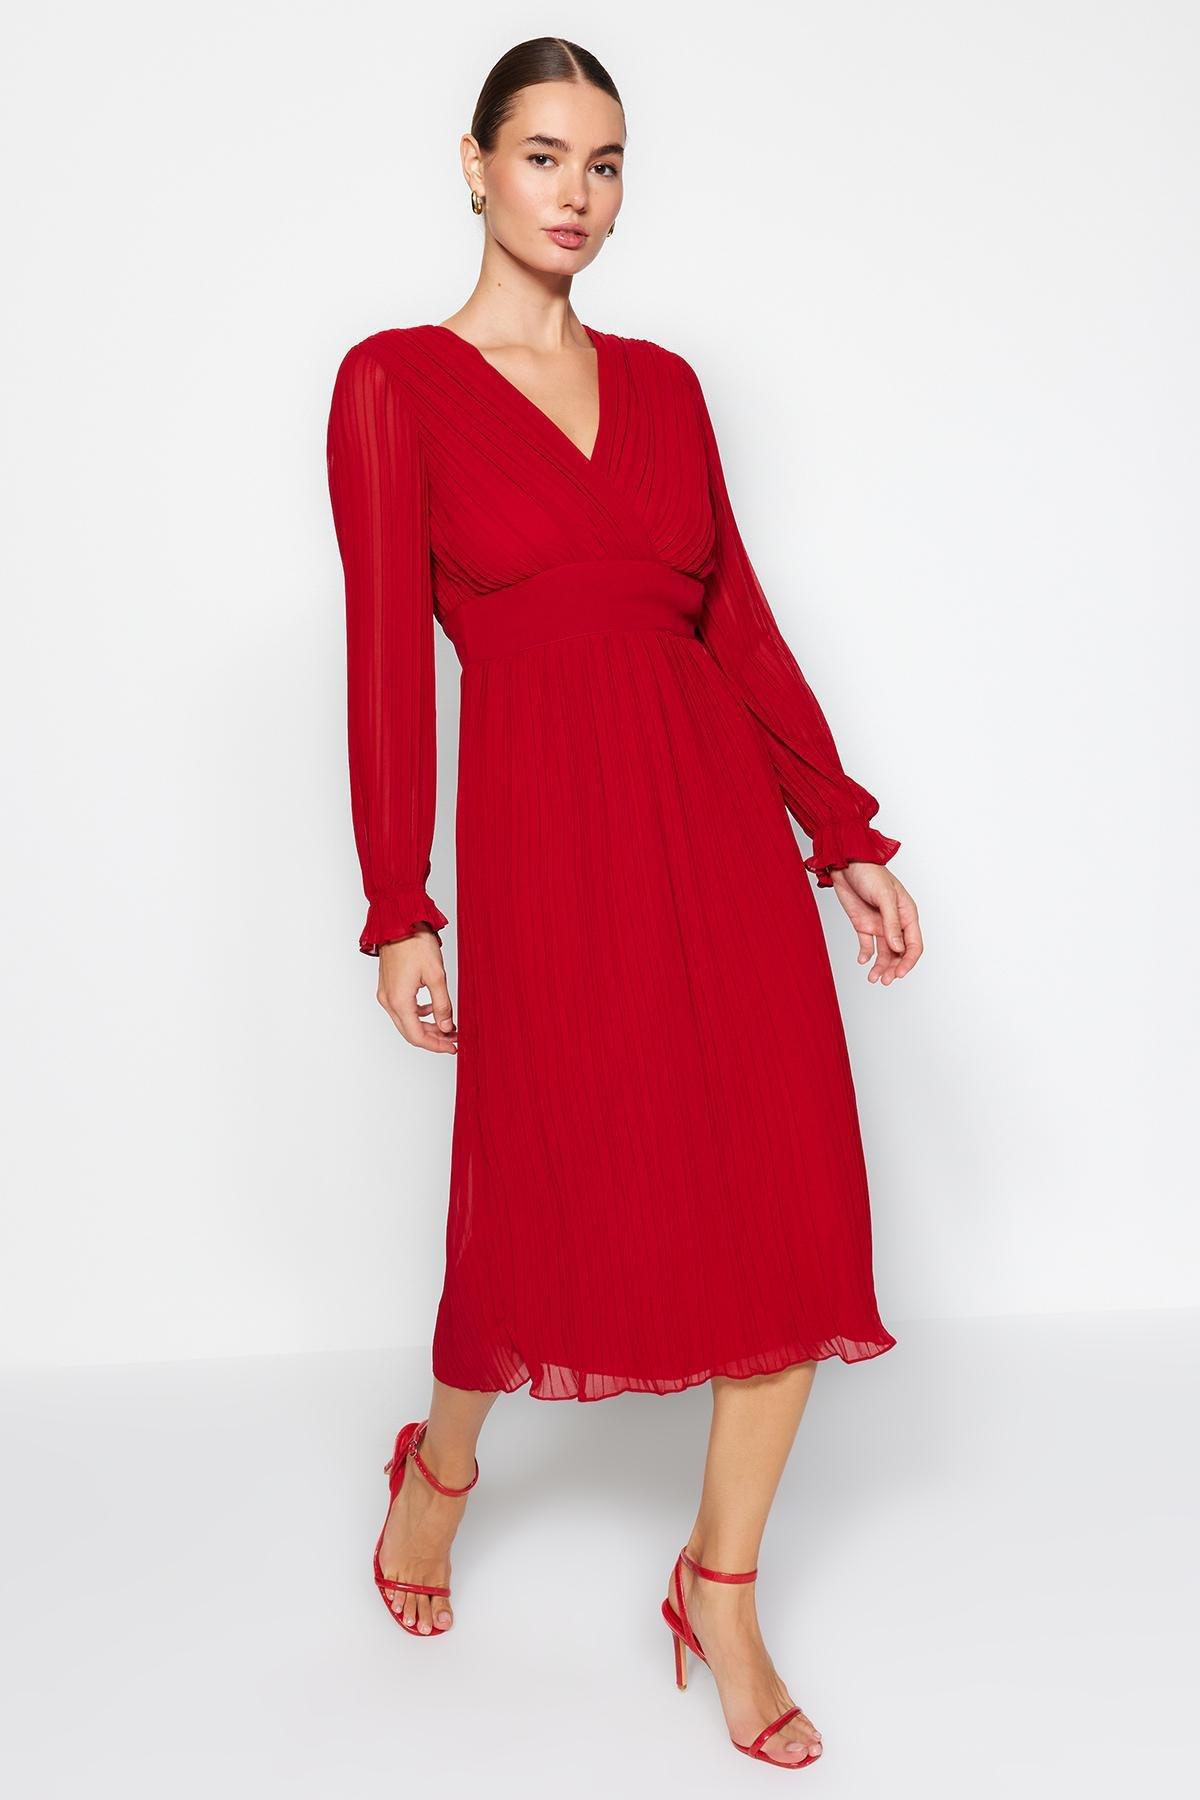 Trendyol - Red Pleated Lined Woven Dress